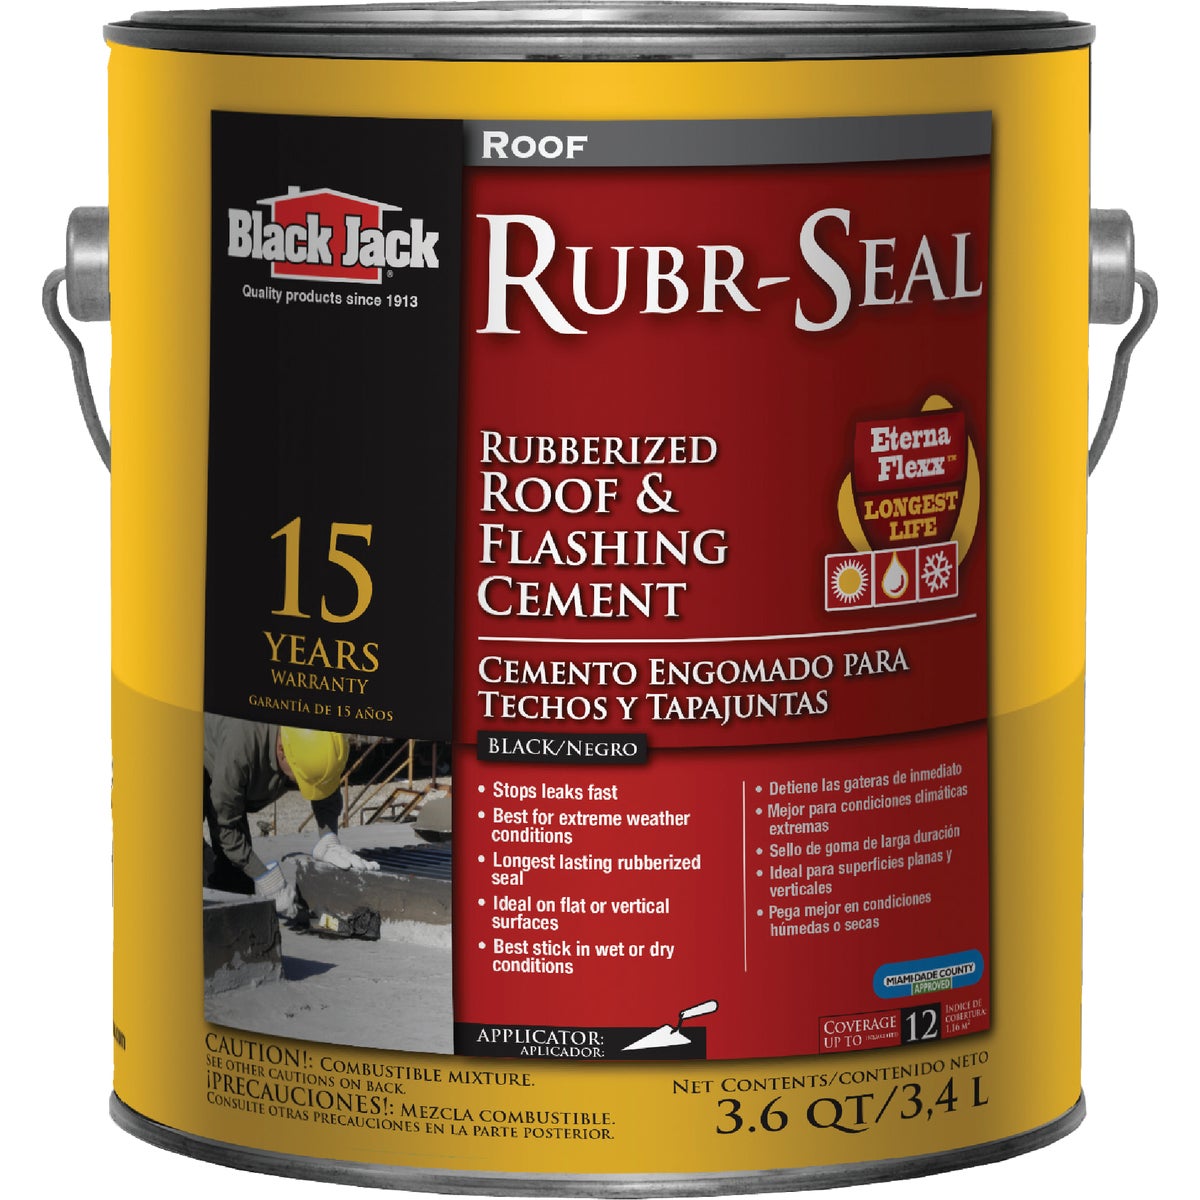 Black Jack Rubr-Seal 1 Gal. 15 Year Roof and Flashing Cement